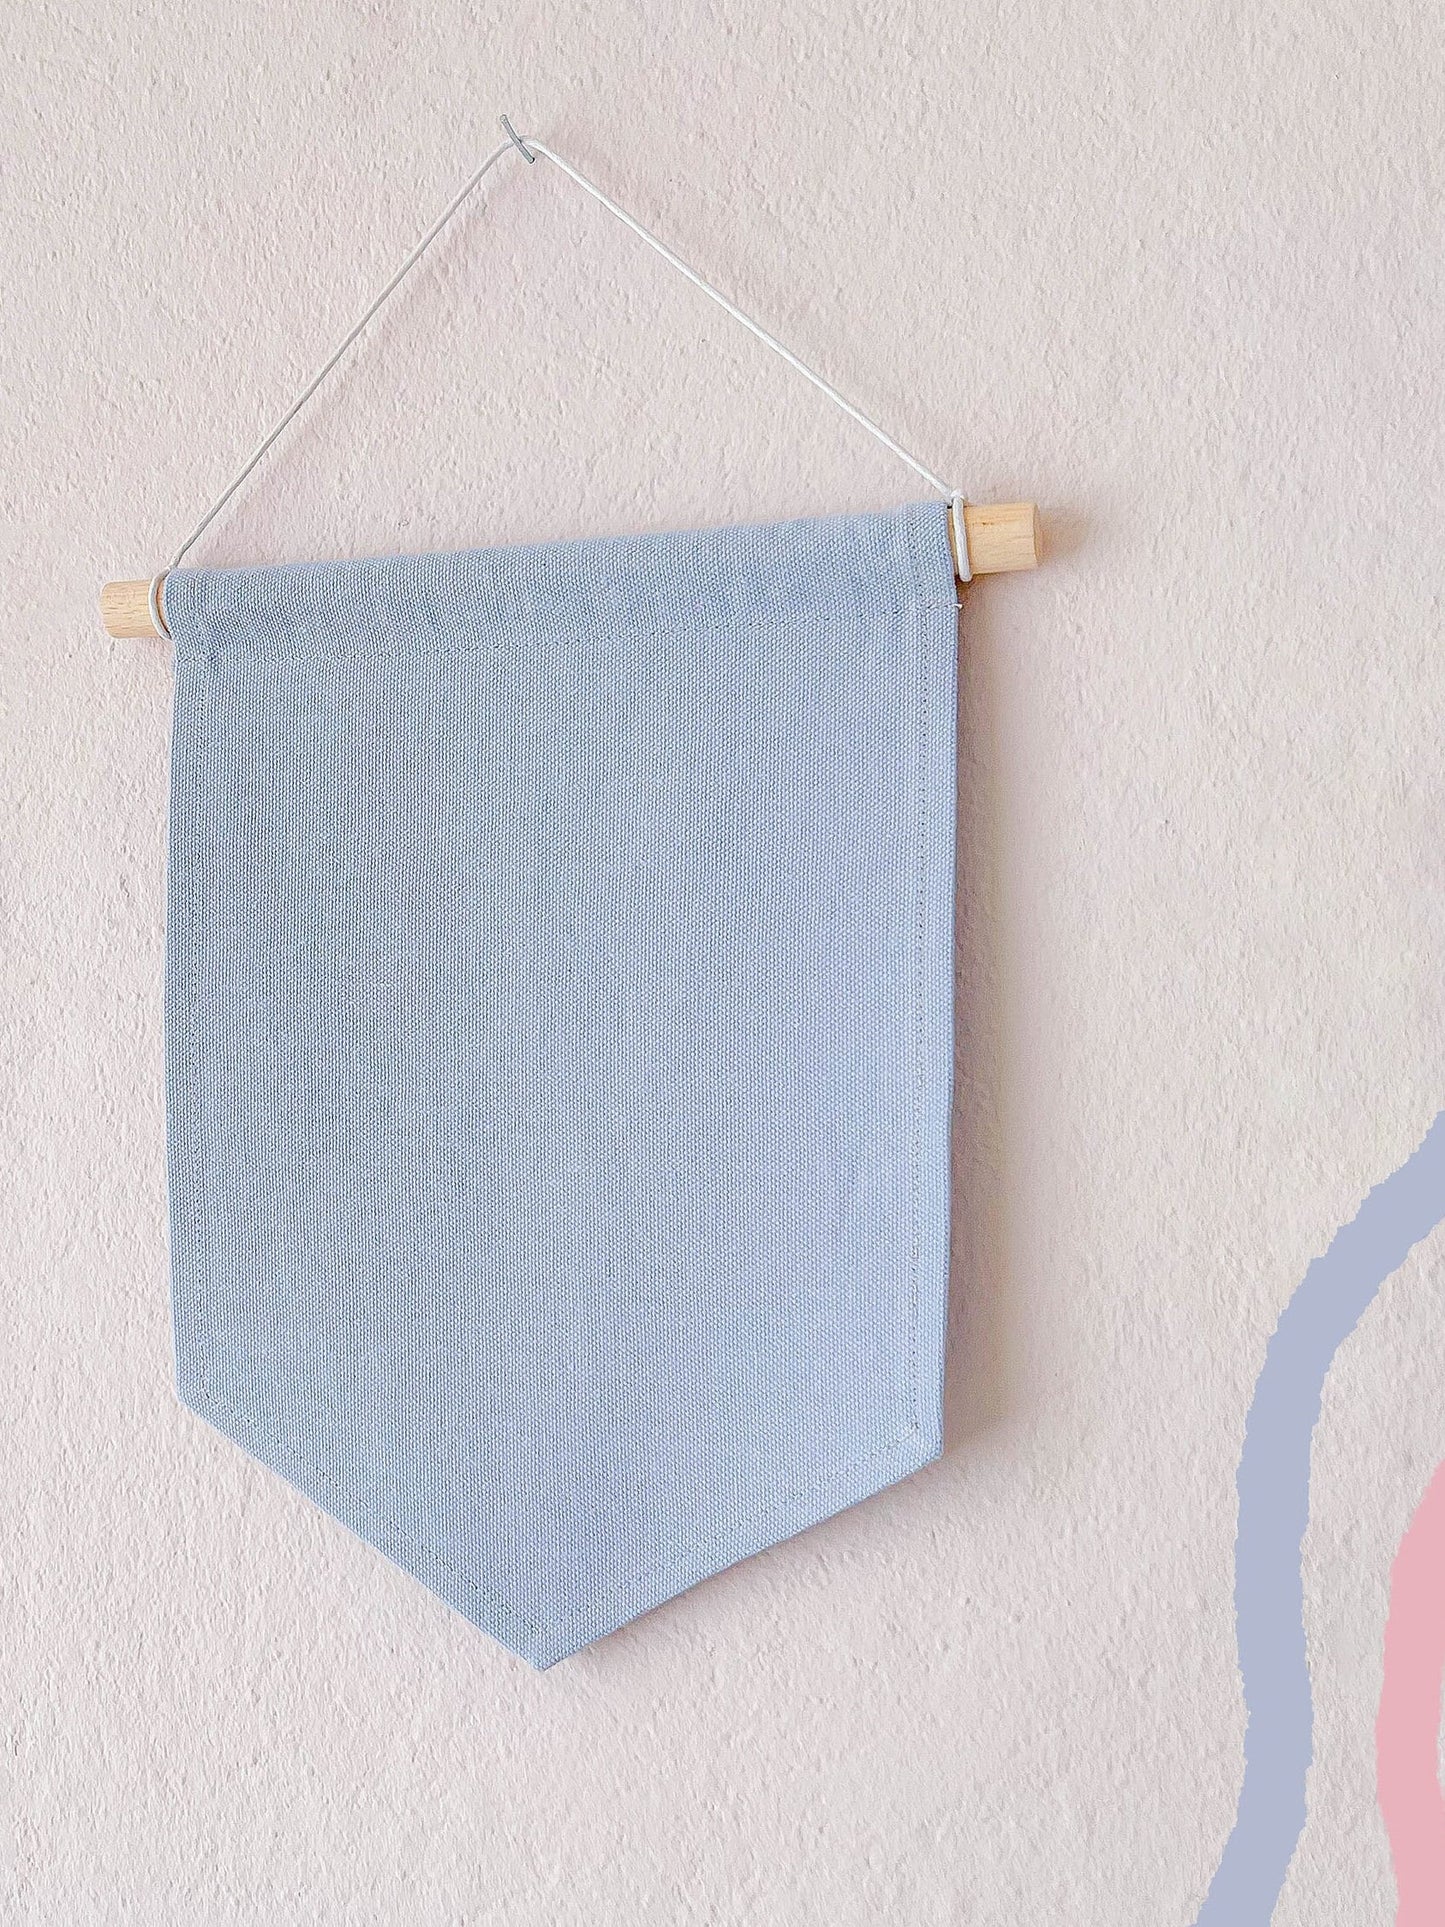 Cute Cotton Pin Banner | L 21cm x 30cm | Handmade in Germany | Light Blue Canvas Fabric | Classic Pin Display